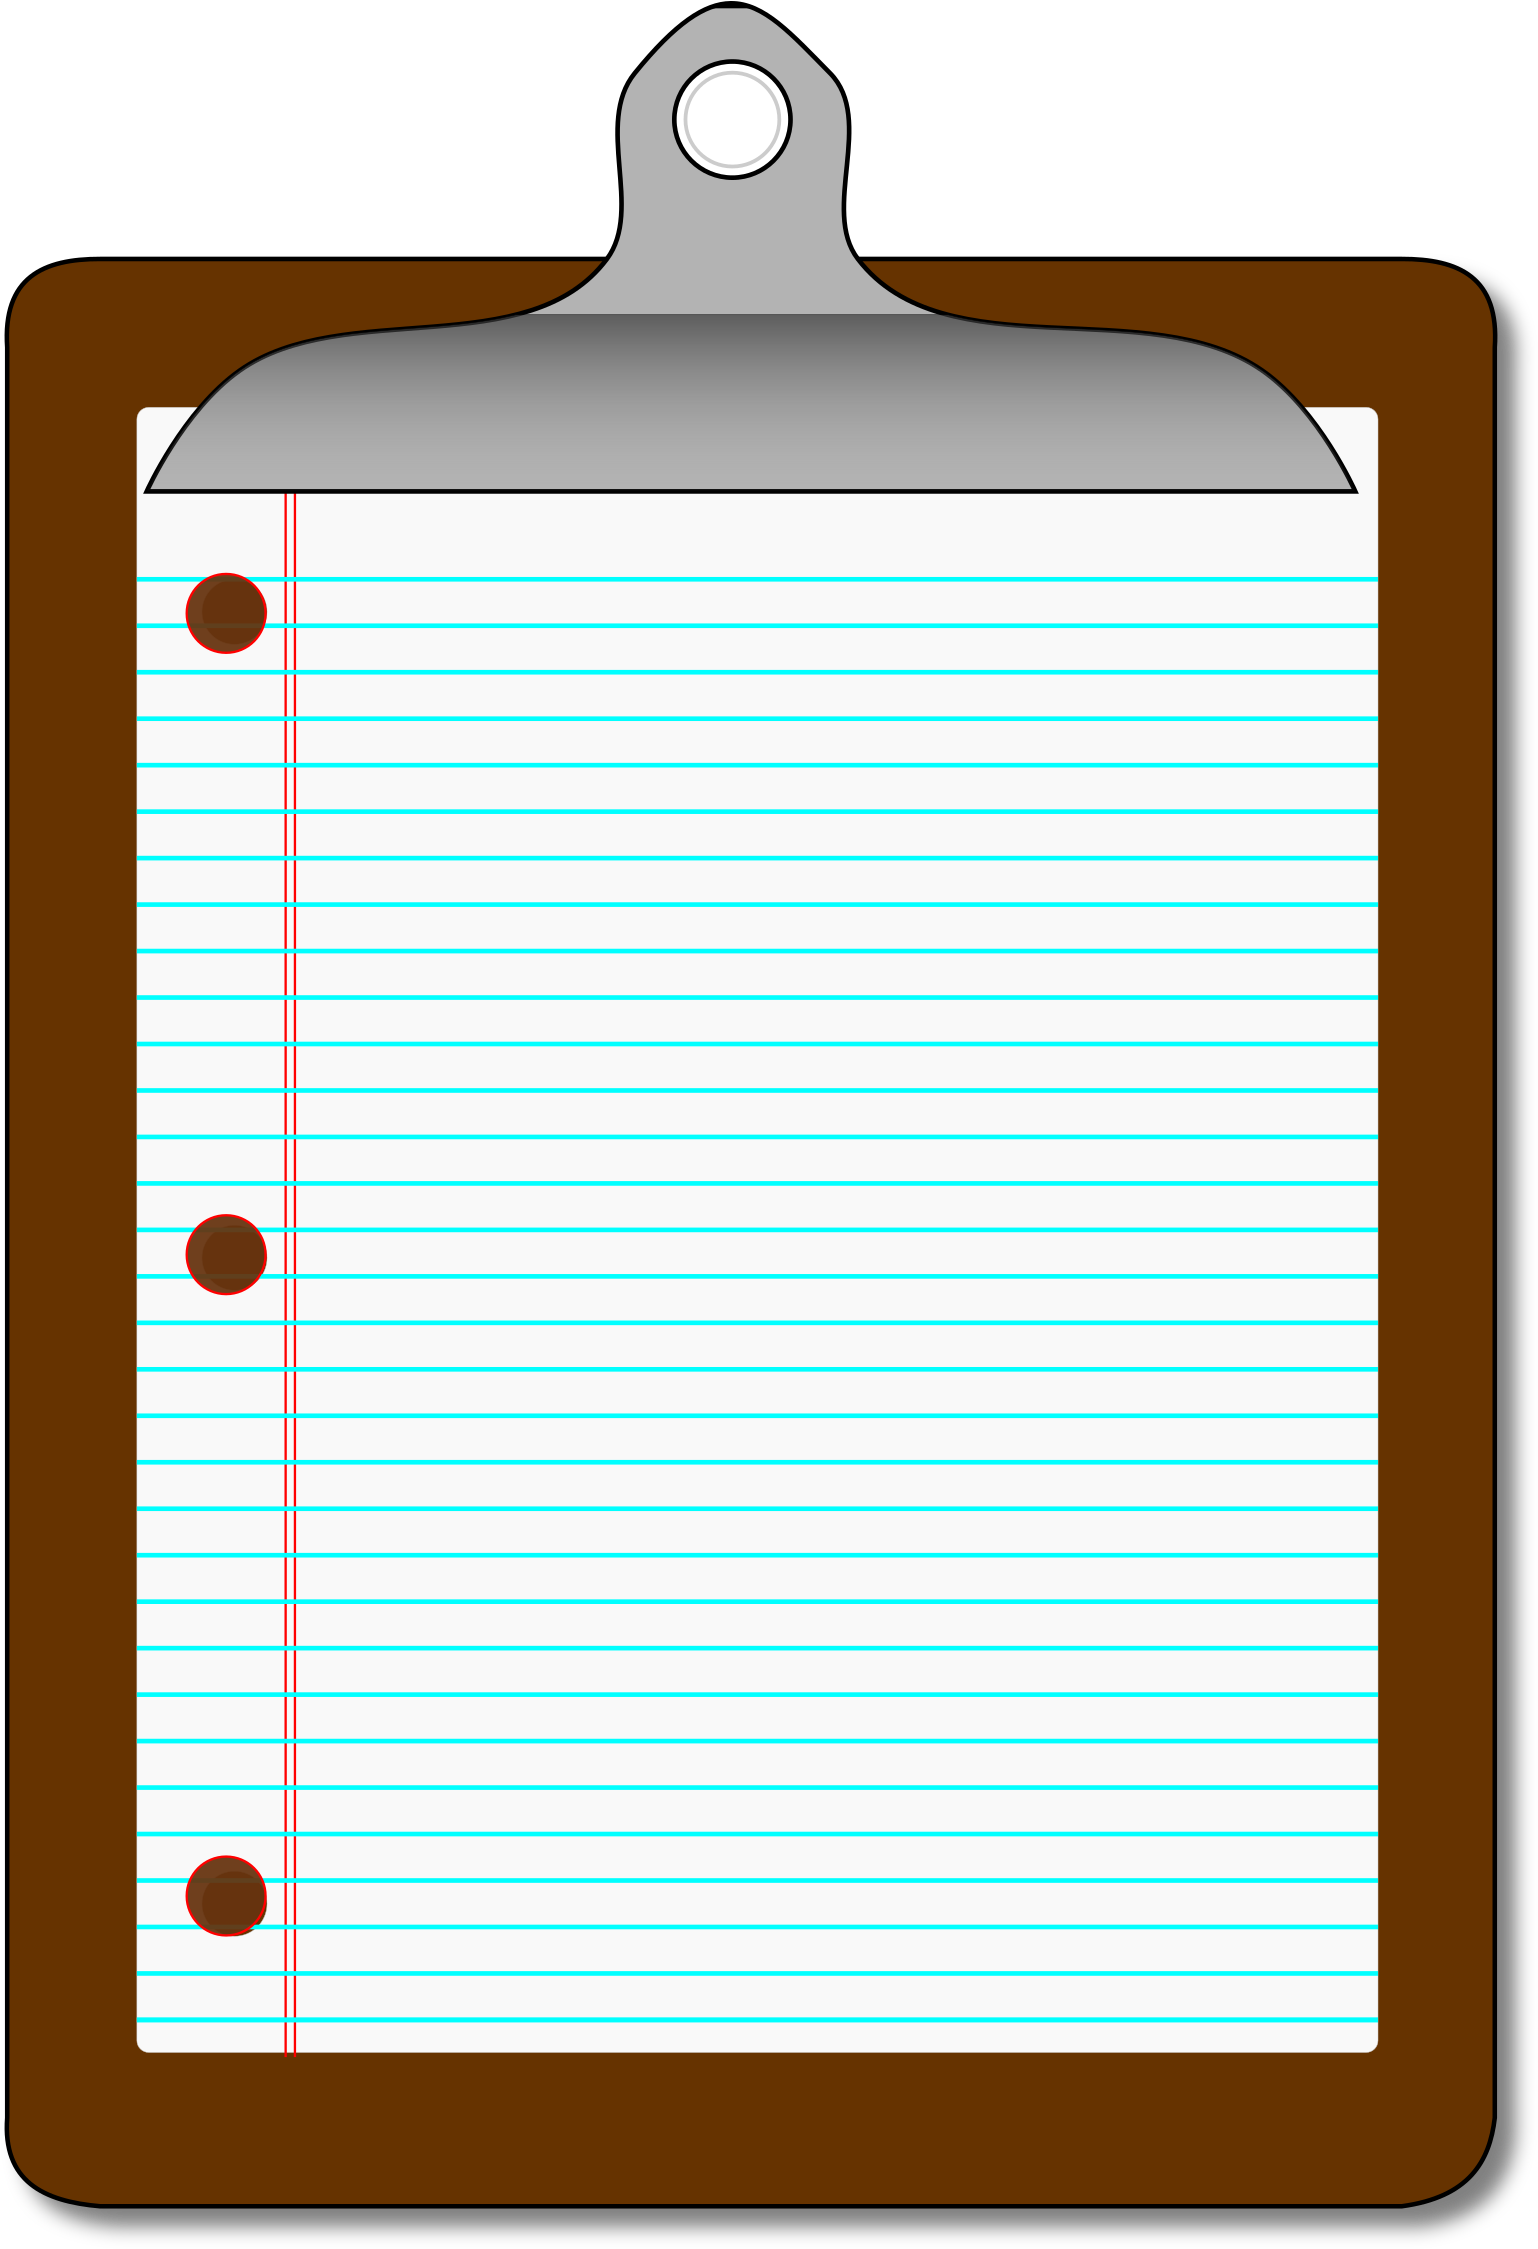 Big Image - Clipboard With Lined Paper (1786x2400)